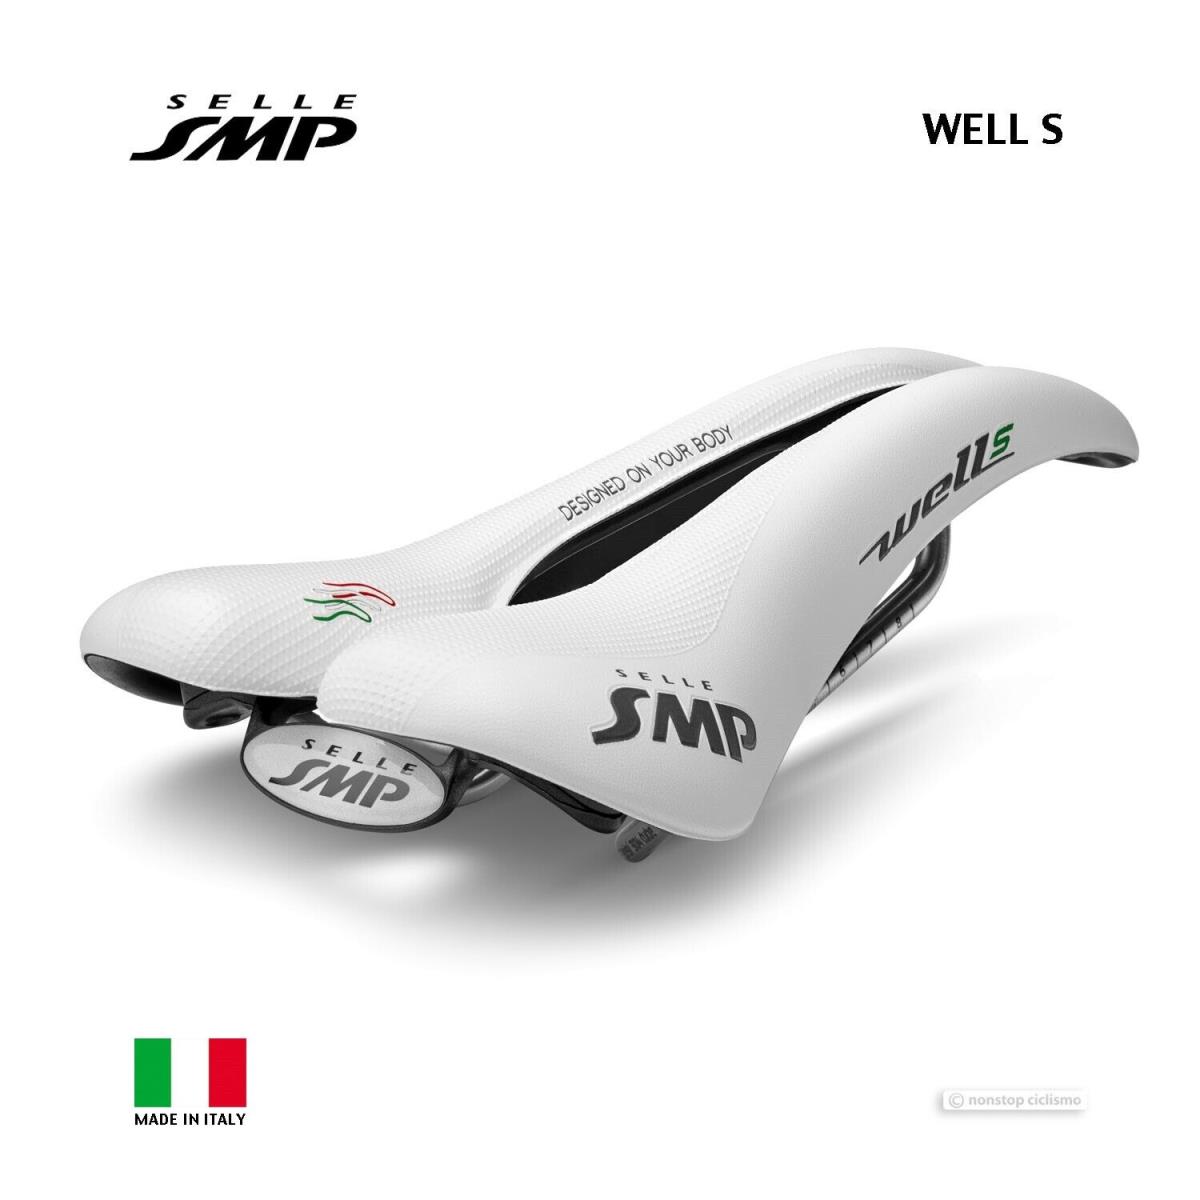 2023 Selle Smp Well S Saddle : White - Made IN Italy - White